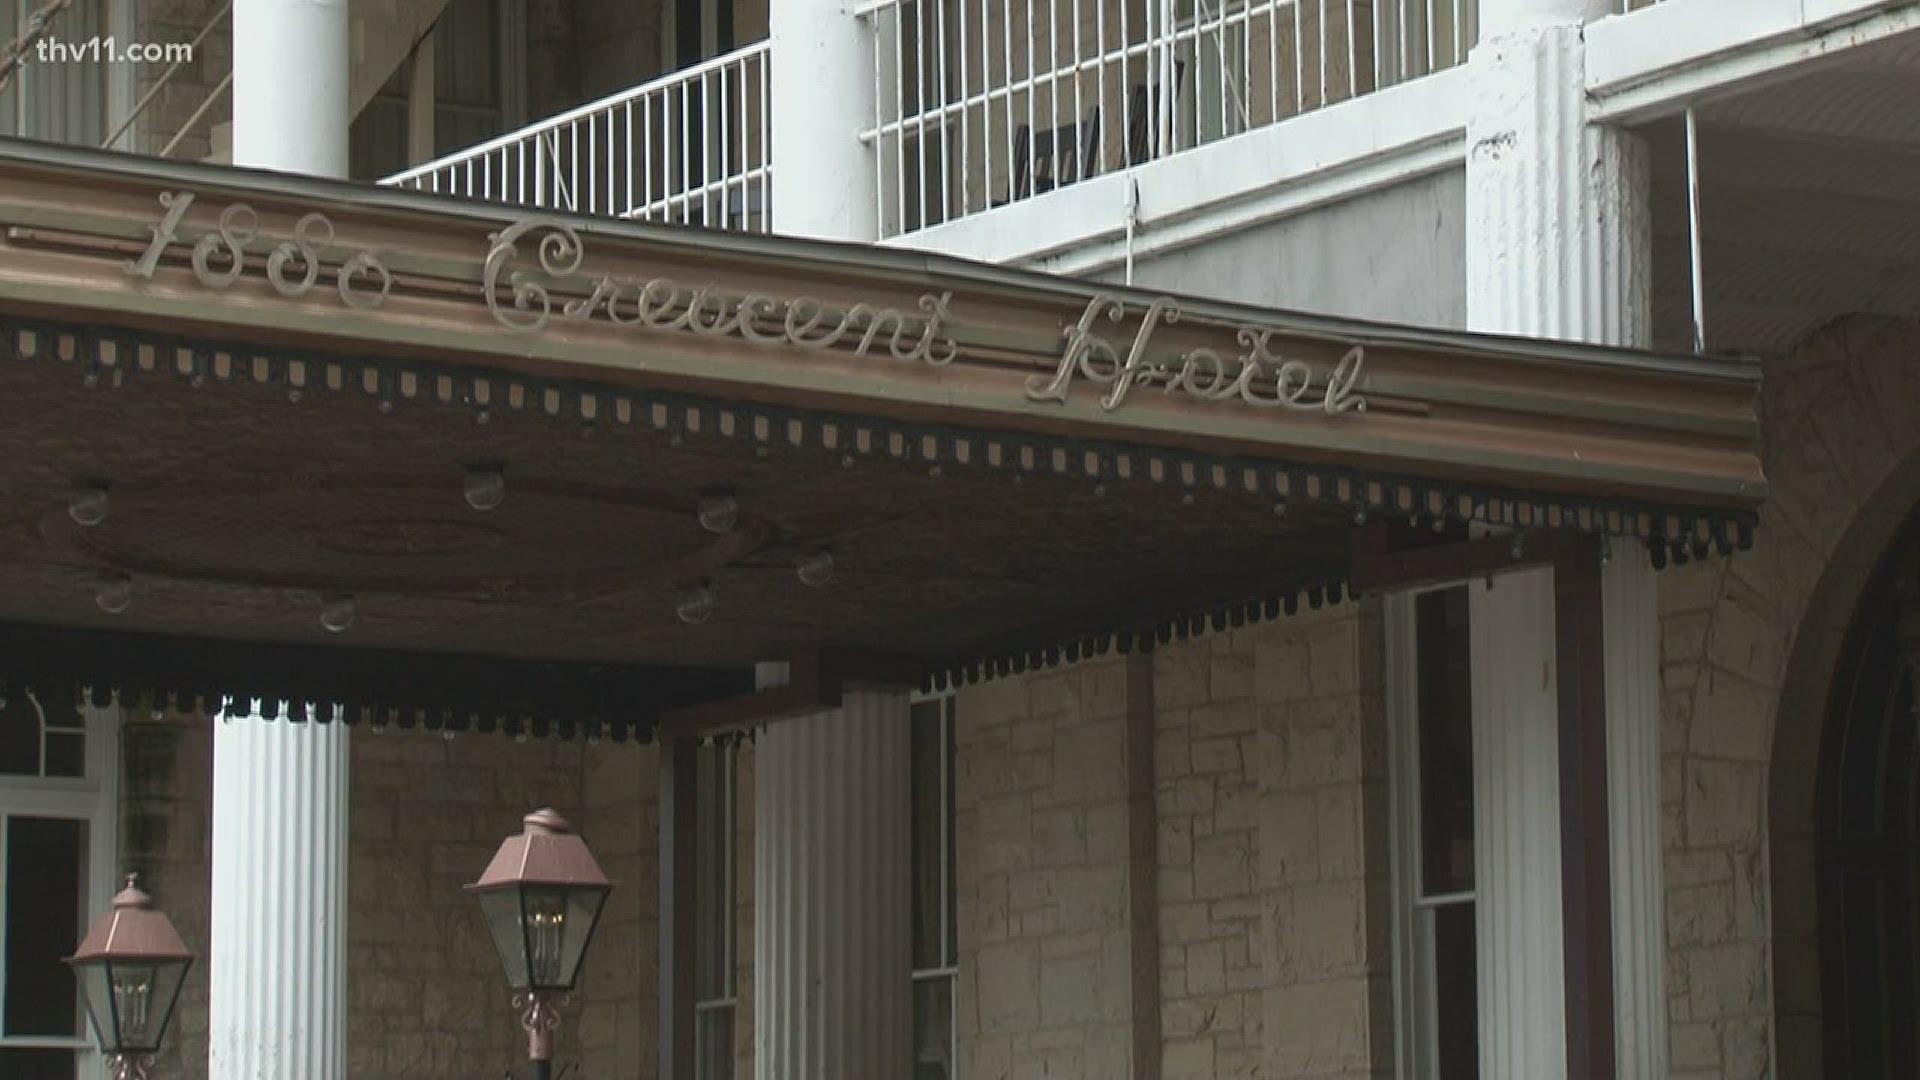 Next Friday, a new chapter begins for one of Arkansas's most historic places. The Crescent Hotel illustrates what opening for business looks like amid the pandemic.